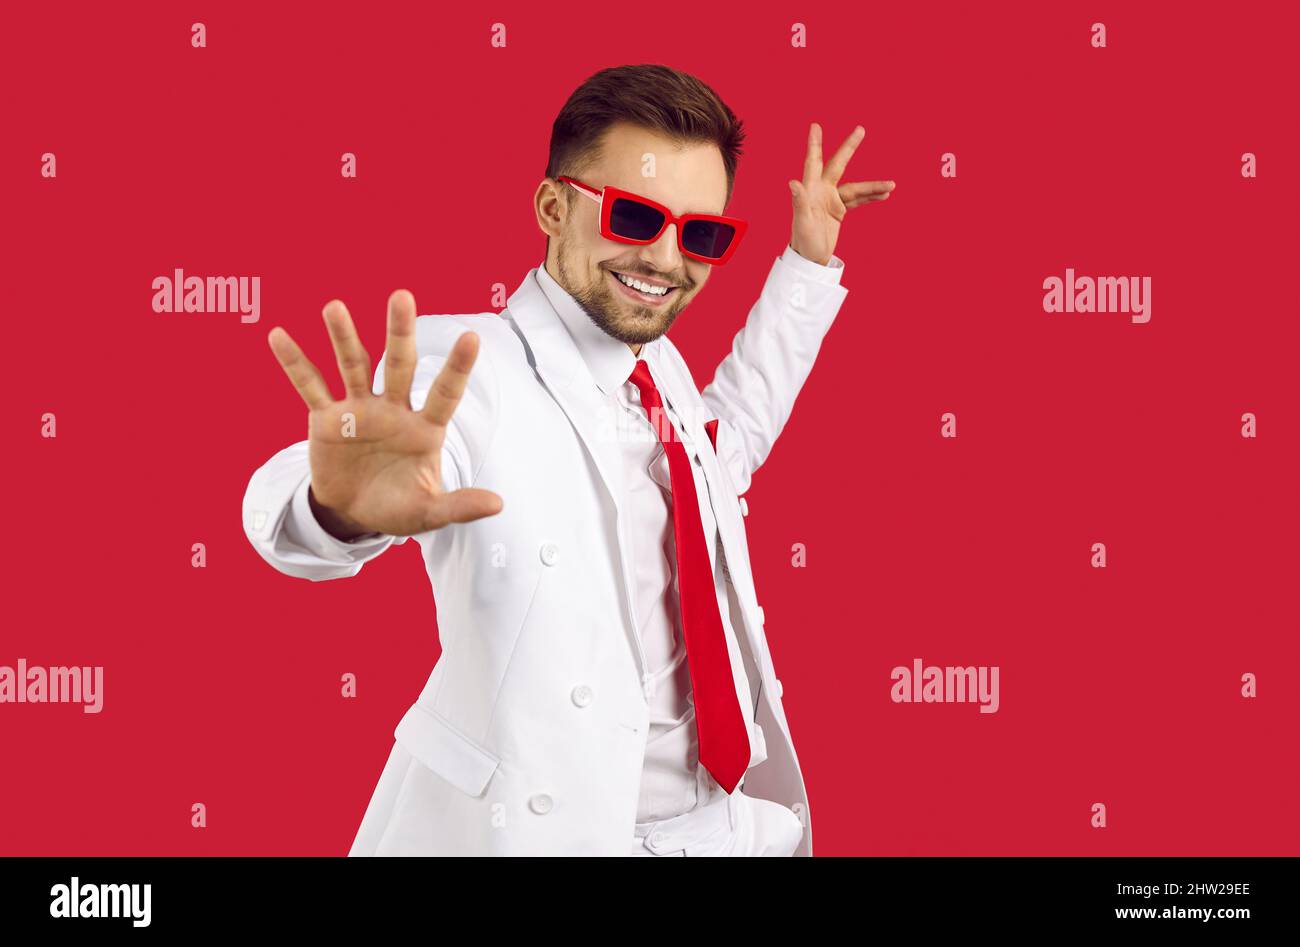 Happy handsome man wearing white suit and party glasses dancing on red background Stock Photo